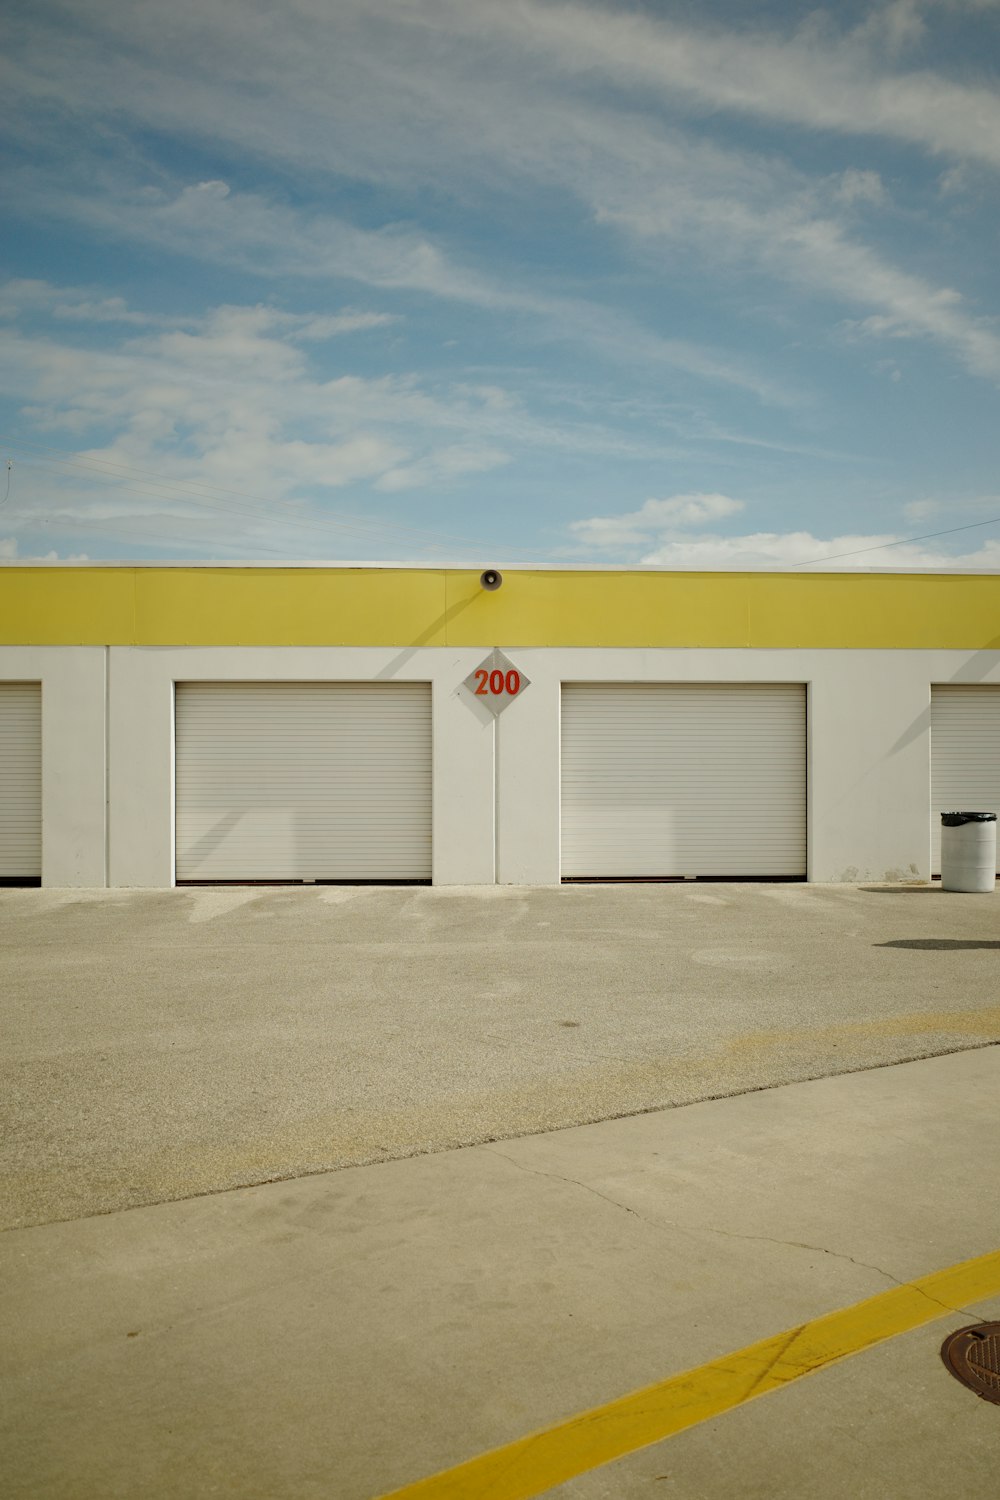 a yellow and white building with two garages